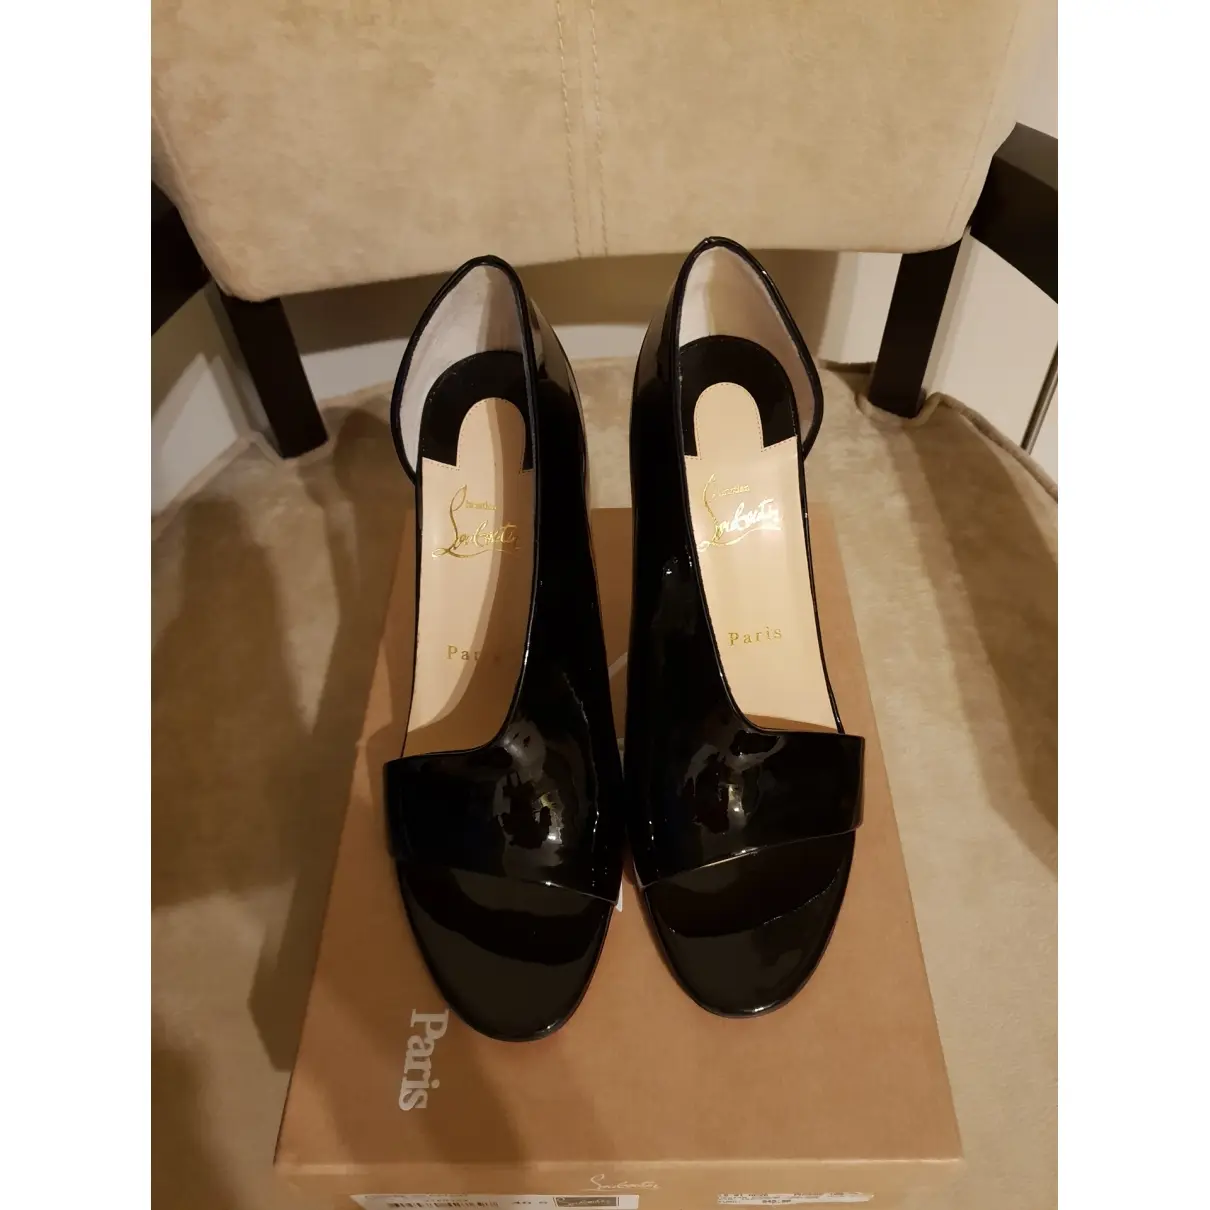 Christian Louboutin Patent leather heels for sale